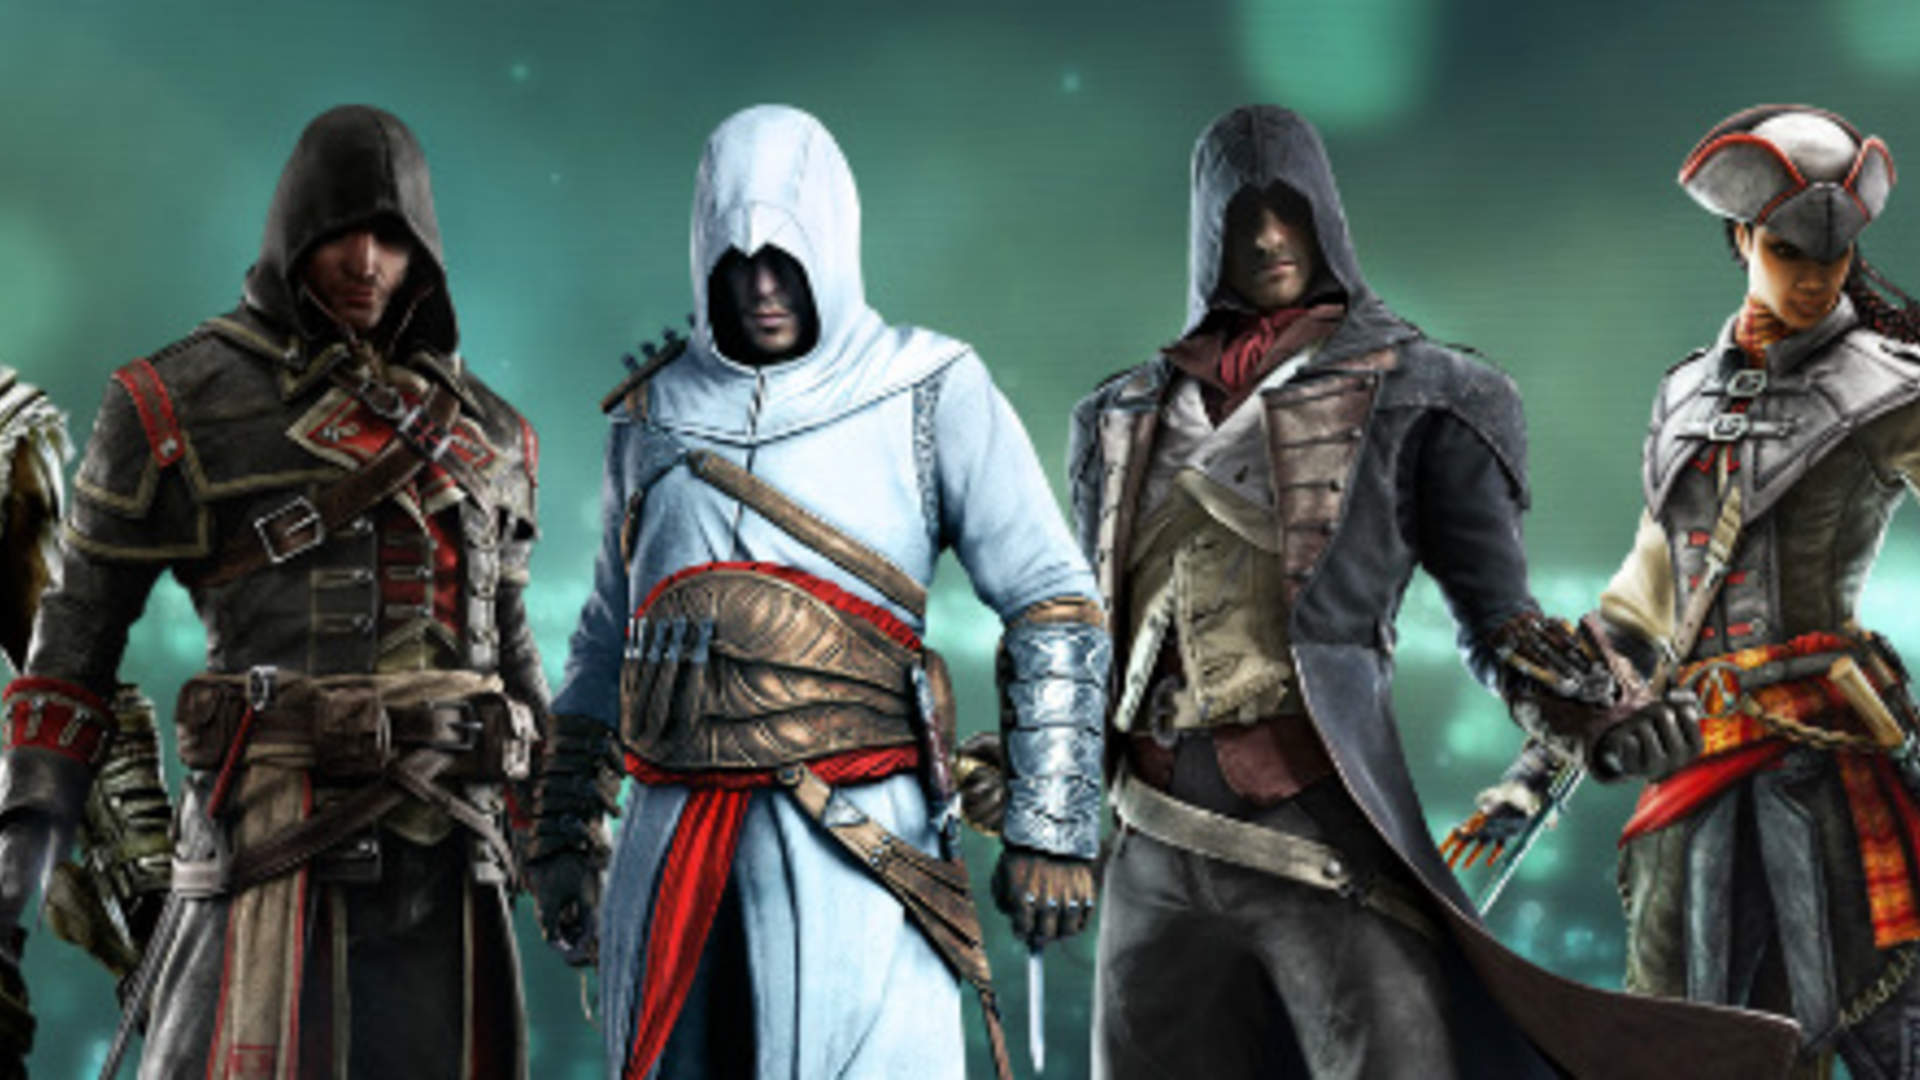 Netflix to Develop Live Action 'Assassin's Creed' Series with Ubisoft